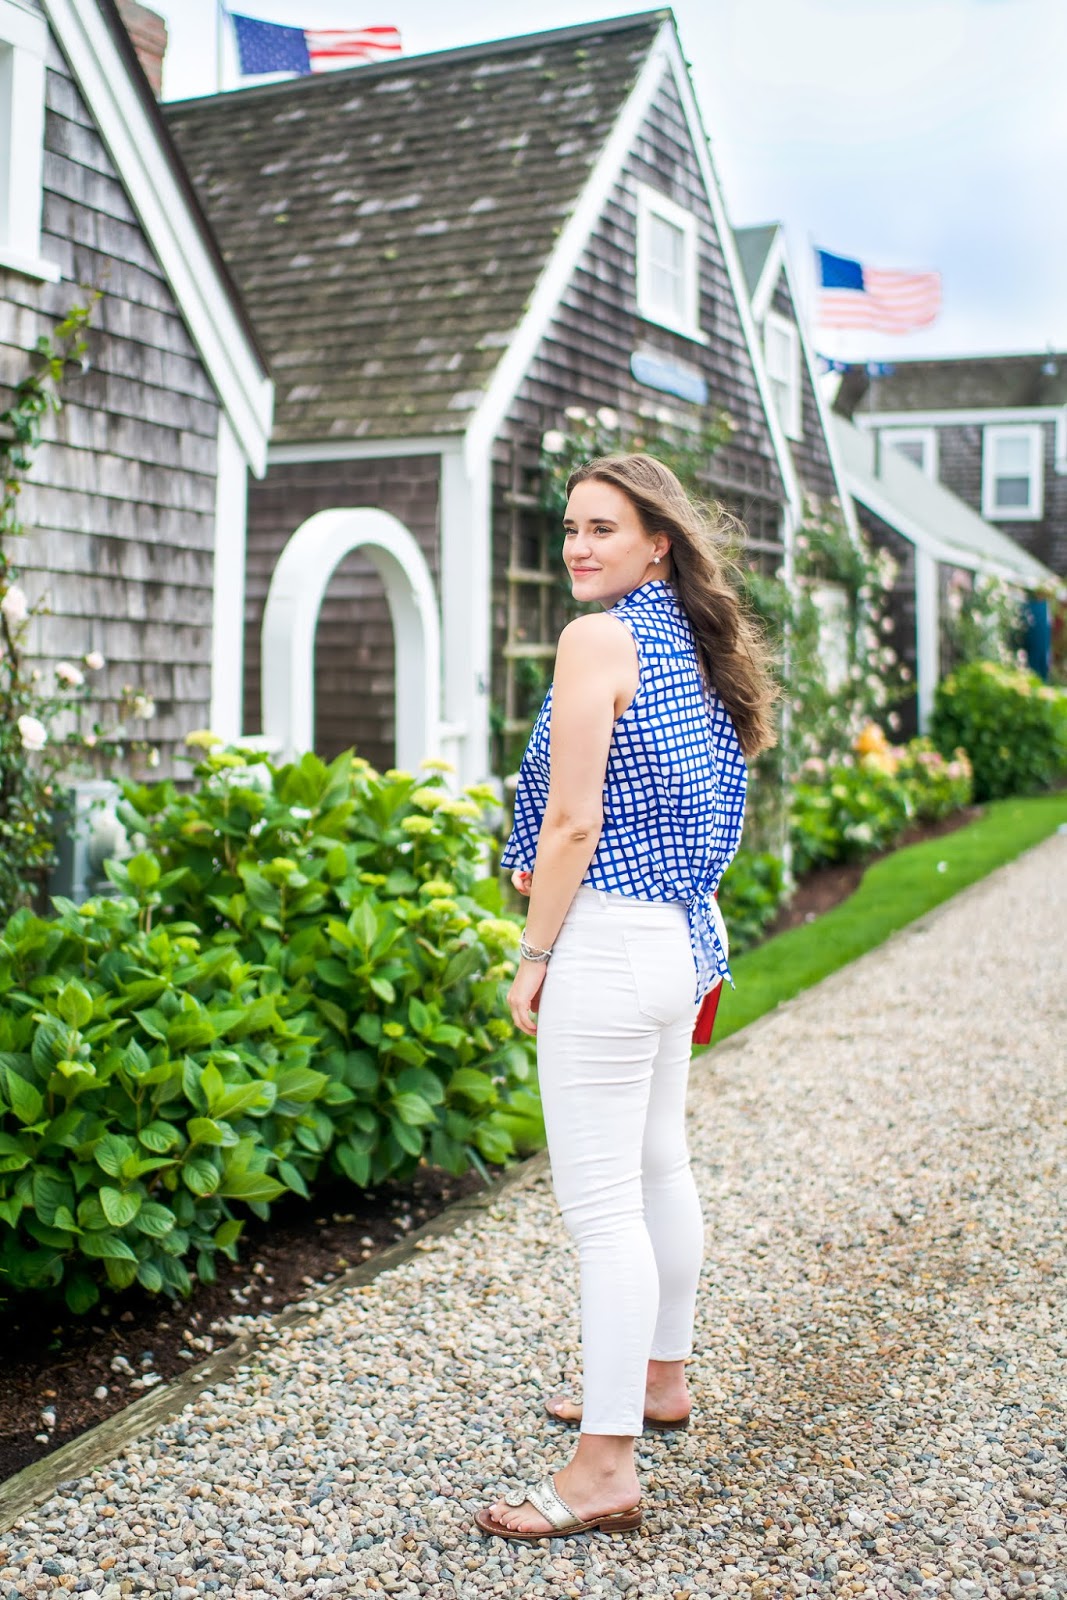 The Perfect Summer Outfit for a Stroll in Nantucket featured by popular New York fashion blogger, Covering the Bases